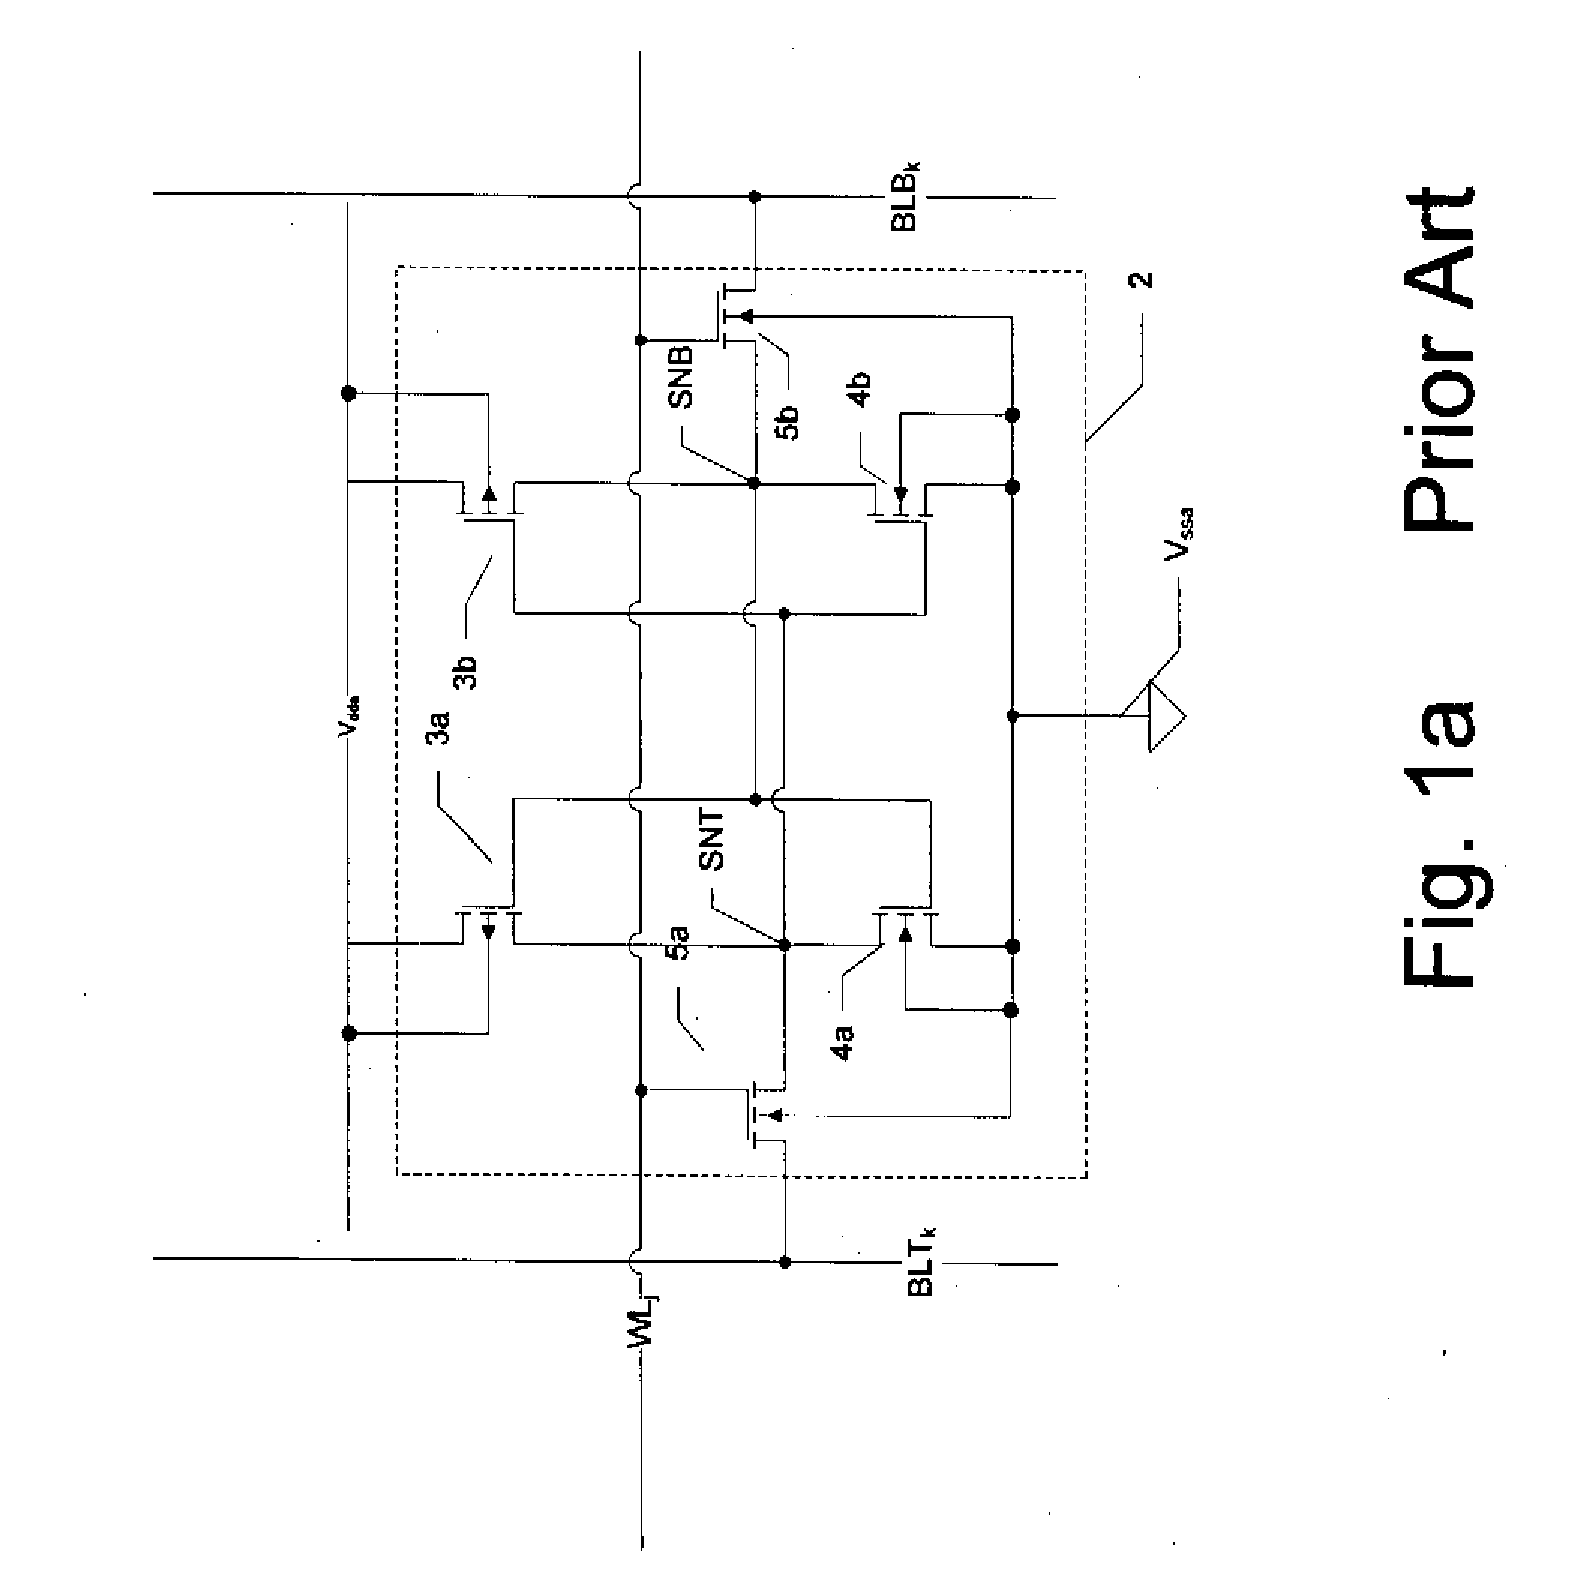 Method of Stressing Static Random Access Memories for Pass Transistor Defects